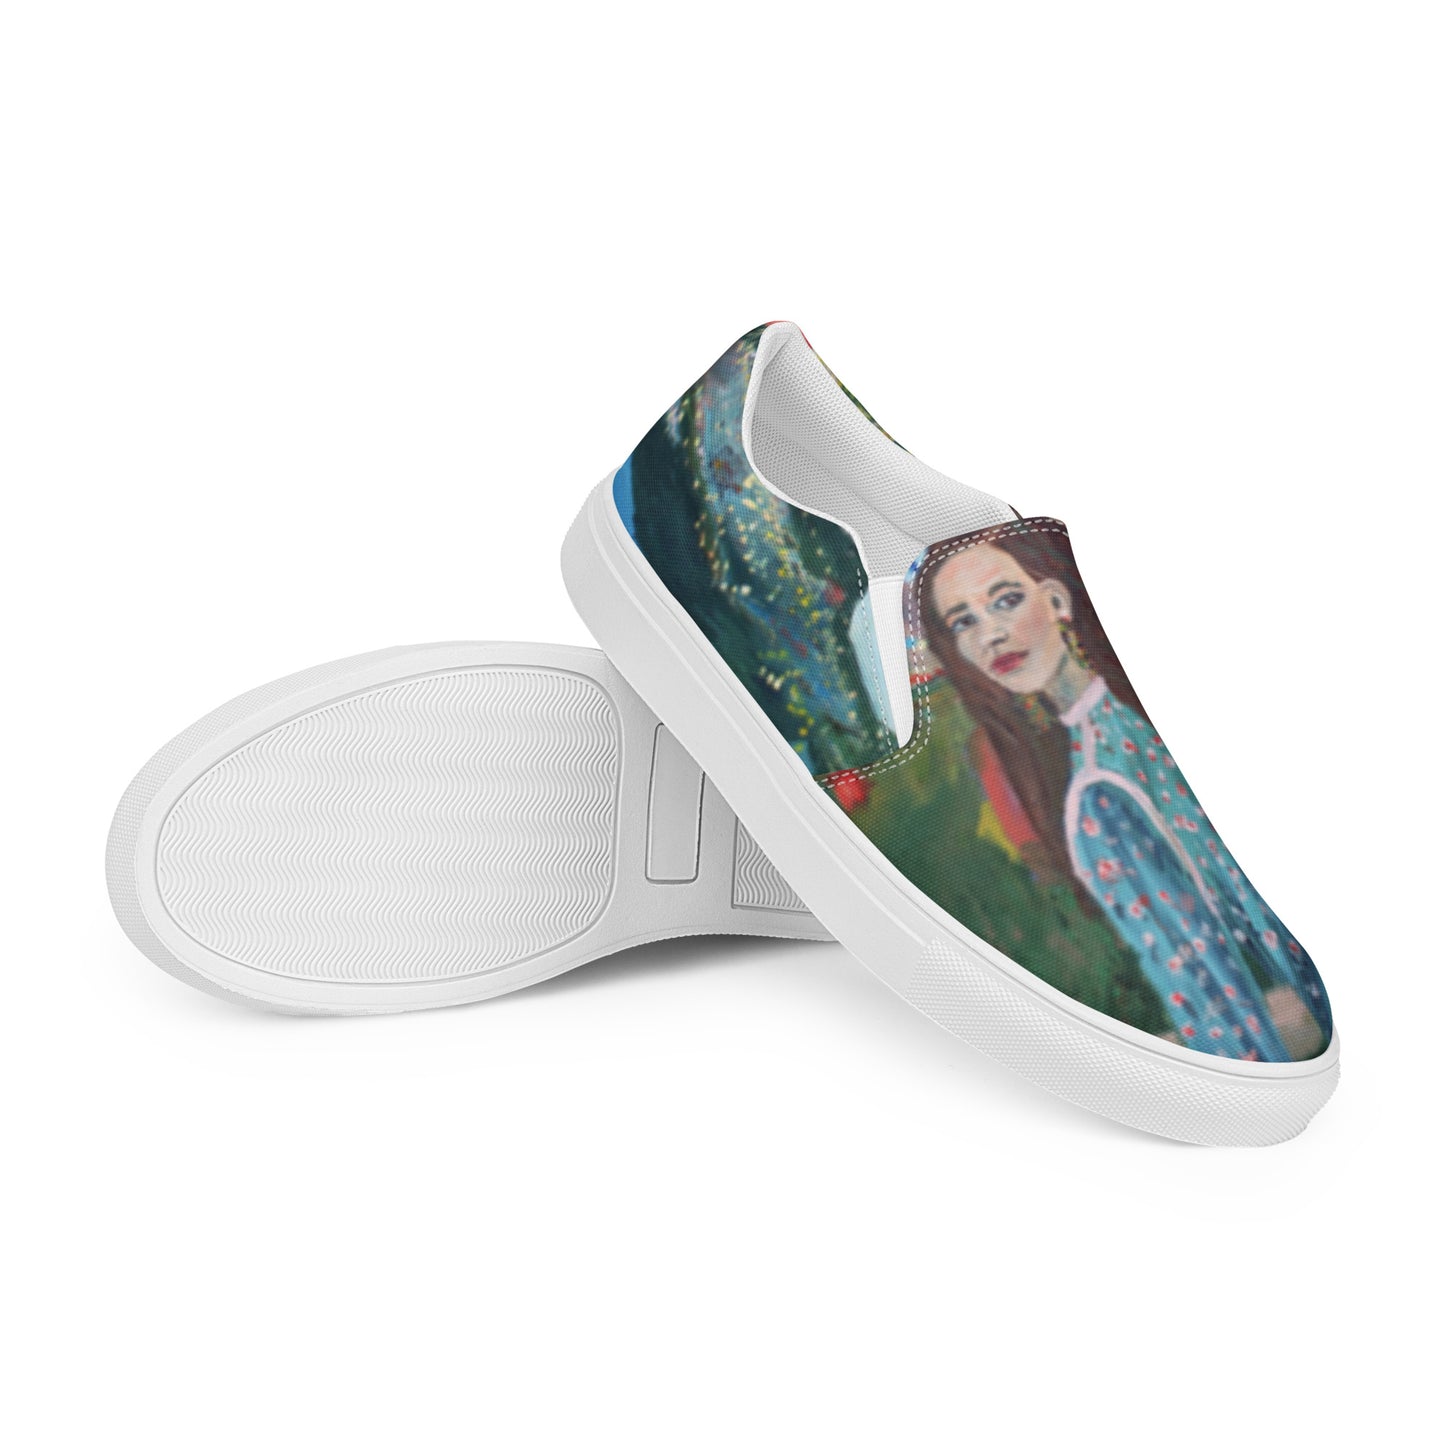 Sunset Hill - Women’s slip-on canvas shoes